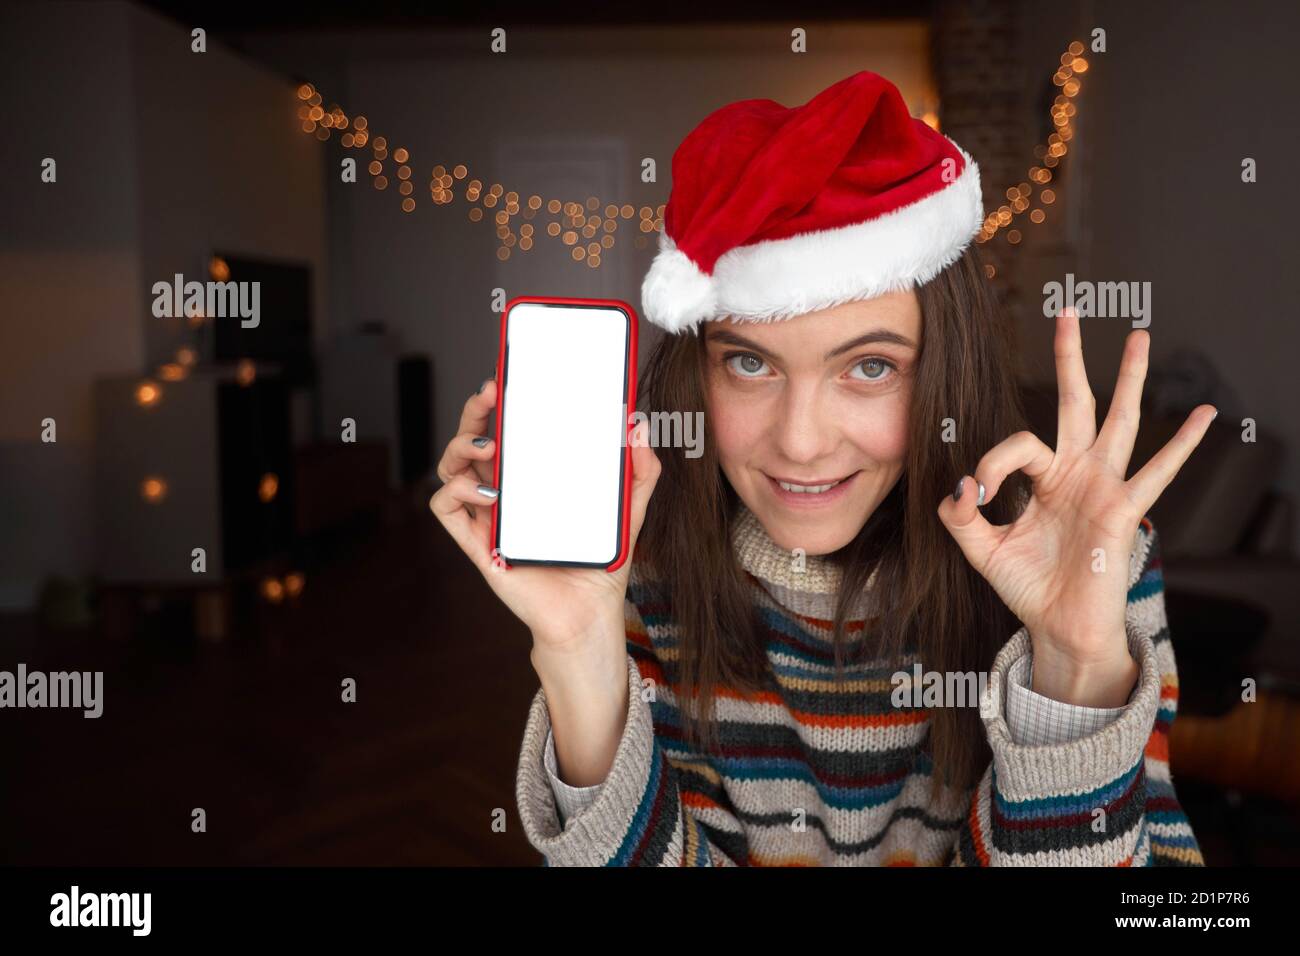 Cheerful woman showing smartphone and OK gesture on Christmas day Stock Photo